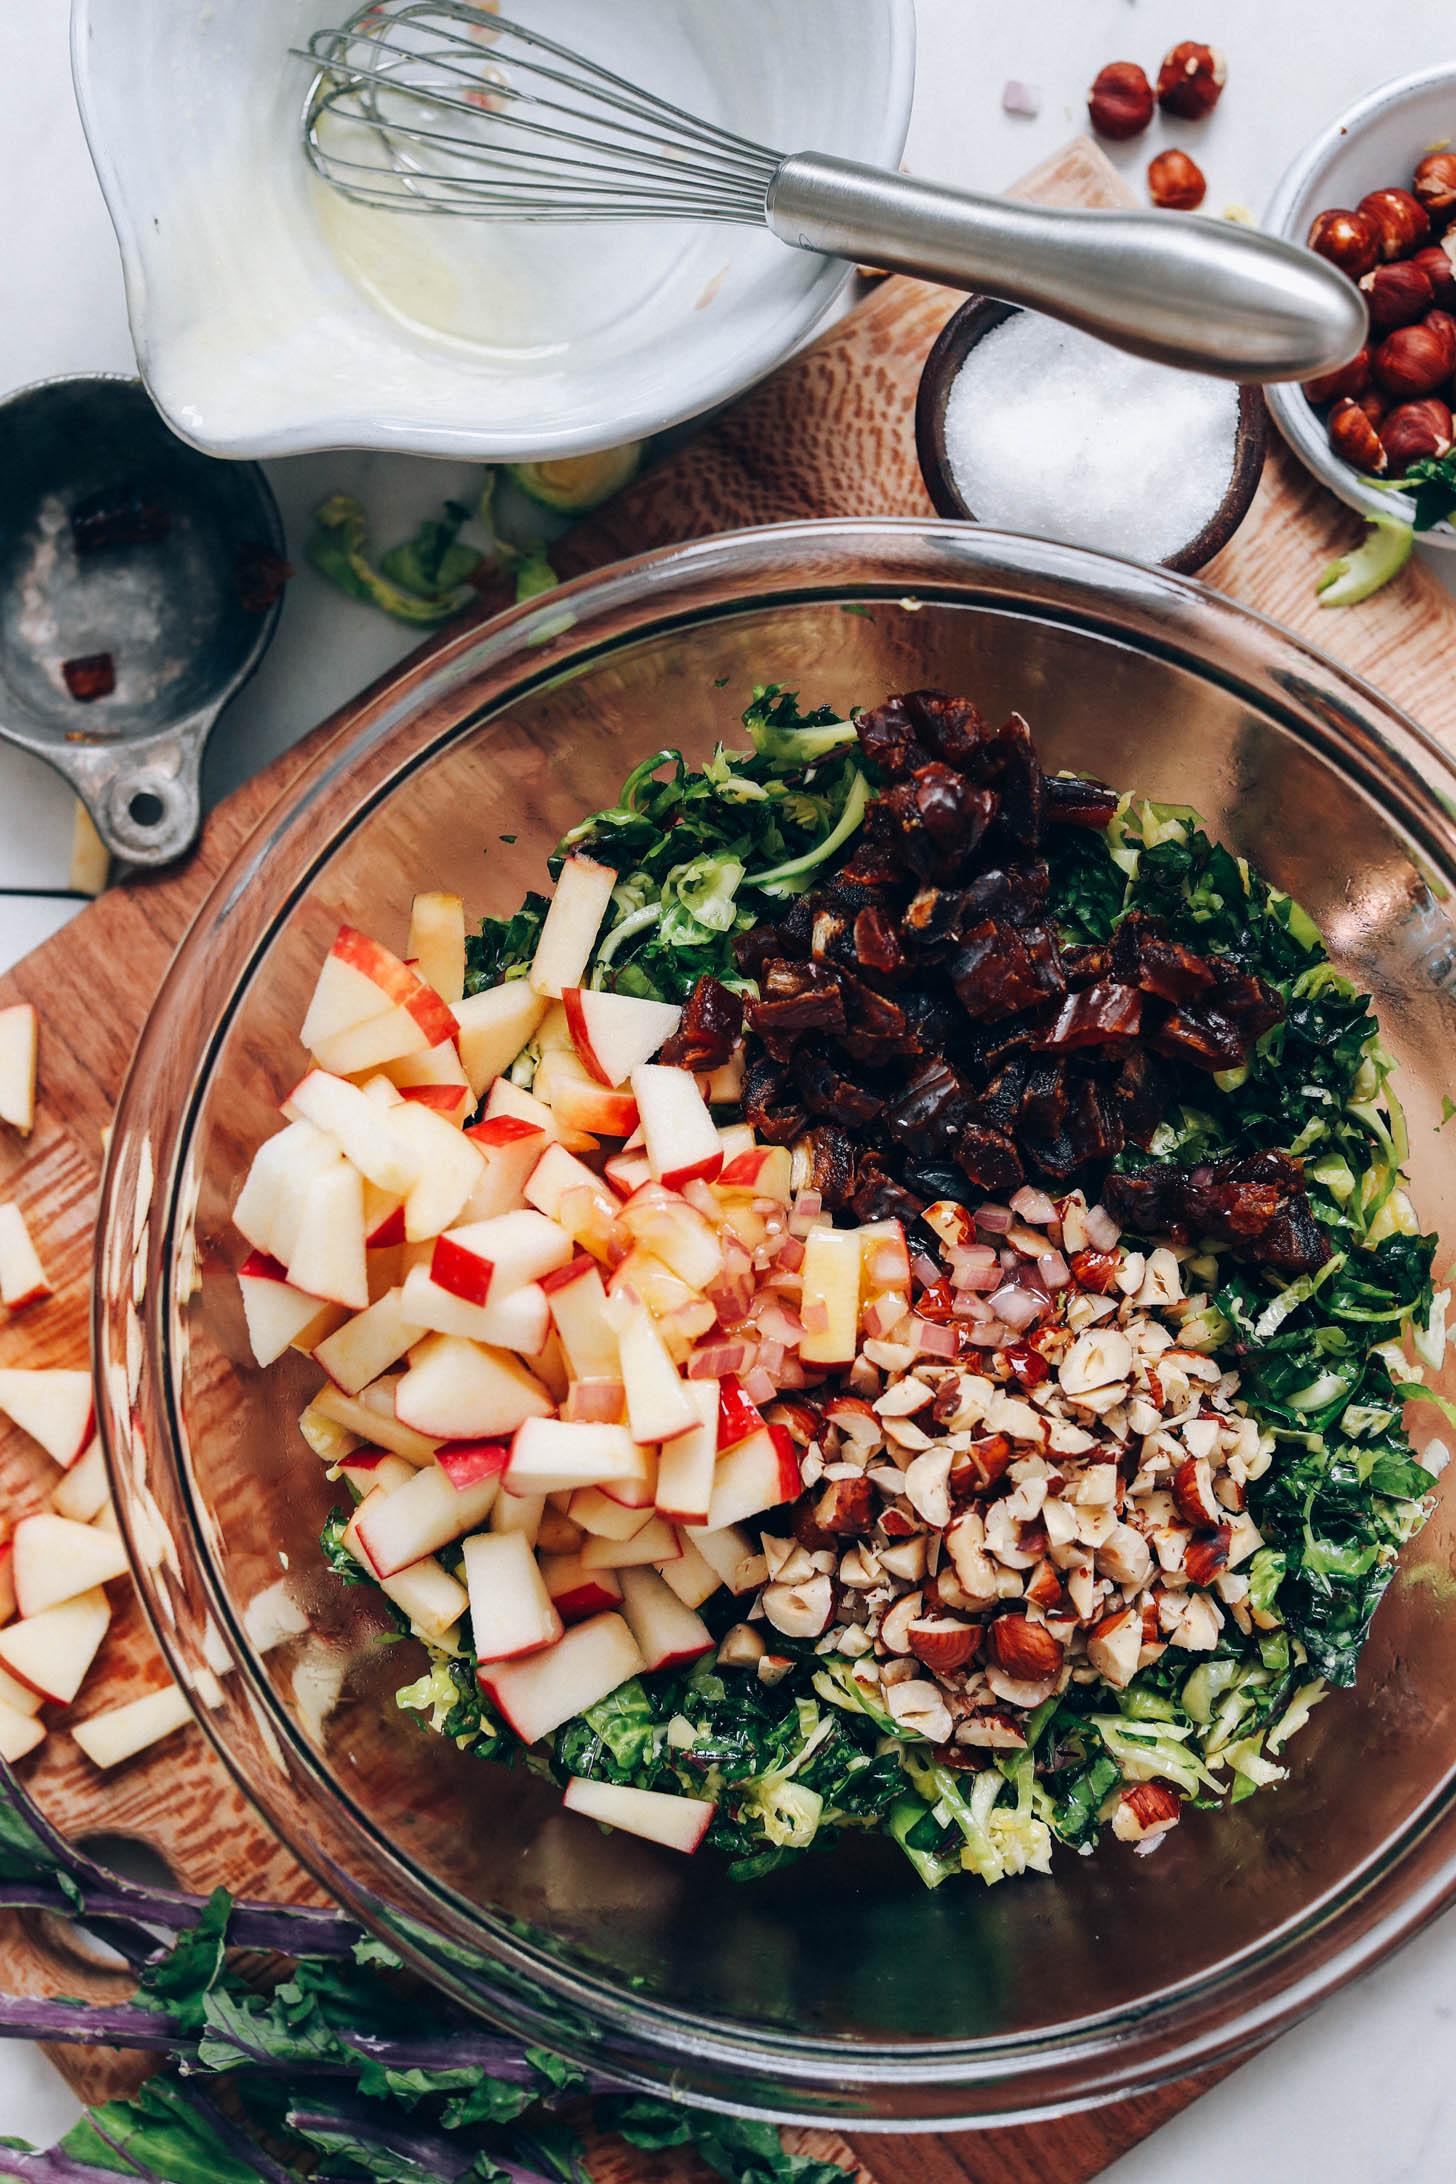 Chopped apples, dates, hazelnuts, and vinaigrette over shaved Brussels sprouts and kale